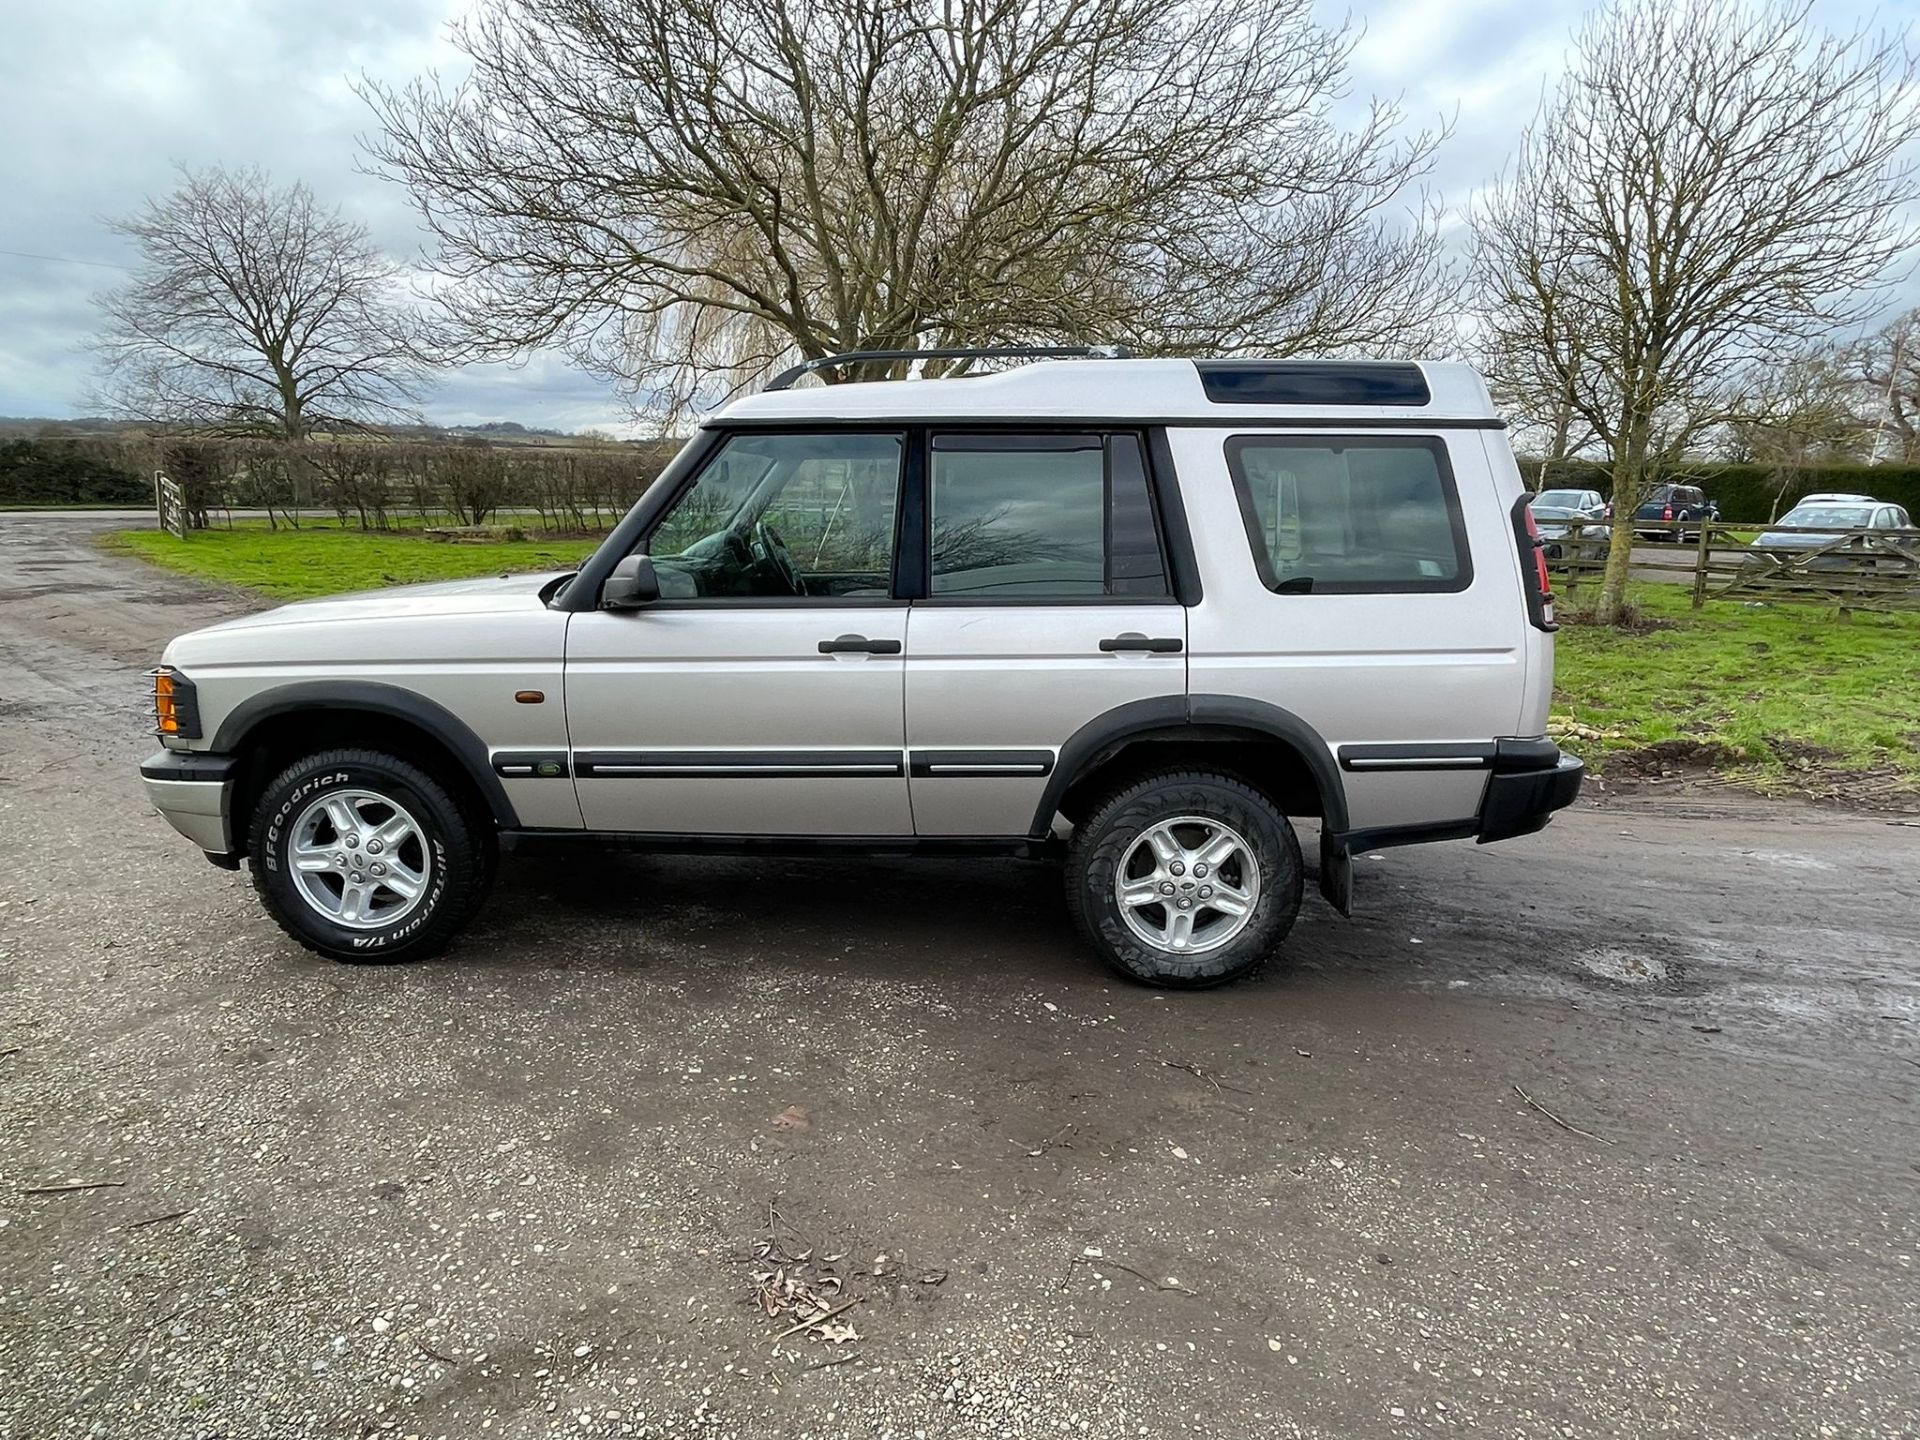 2000 LAND ROVER DISCOVERY TD5 ES SILVER ESTATE, 271,031 MILES, GALVANISED CHASSIS *NO VAT* - Image 4 of 17